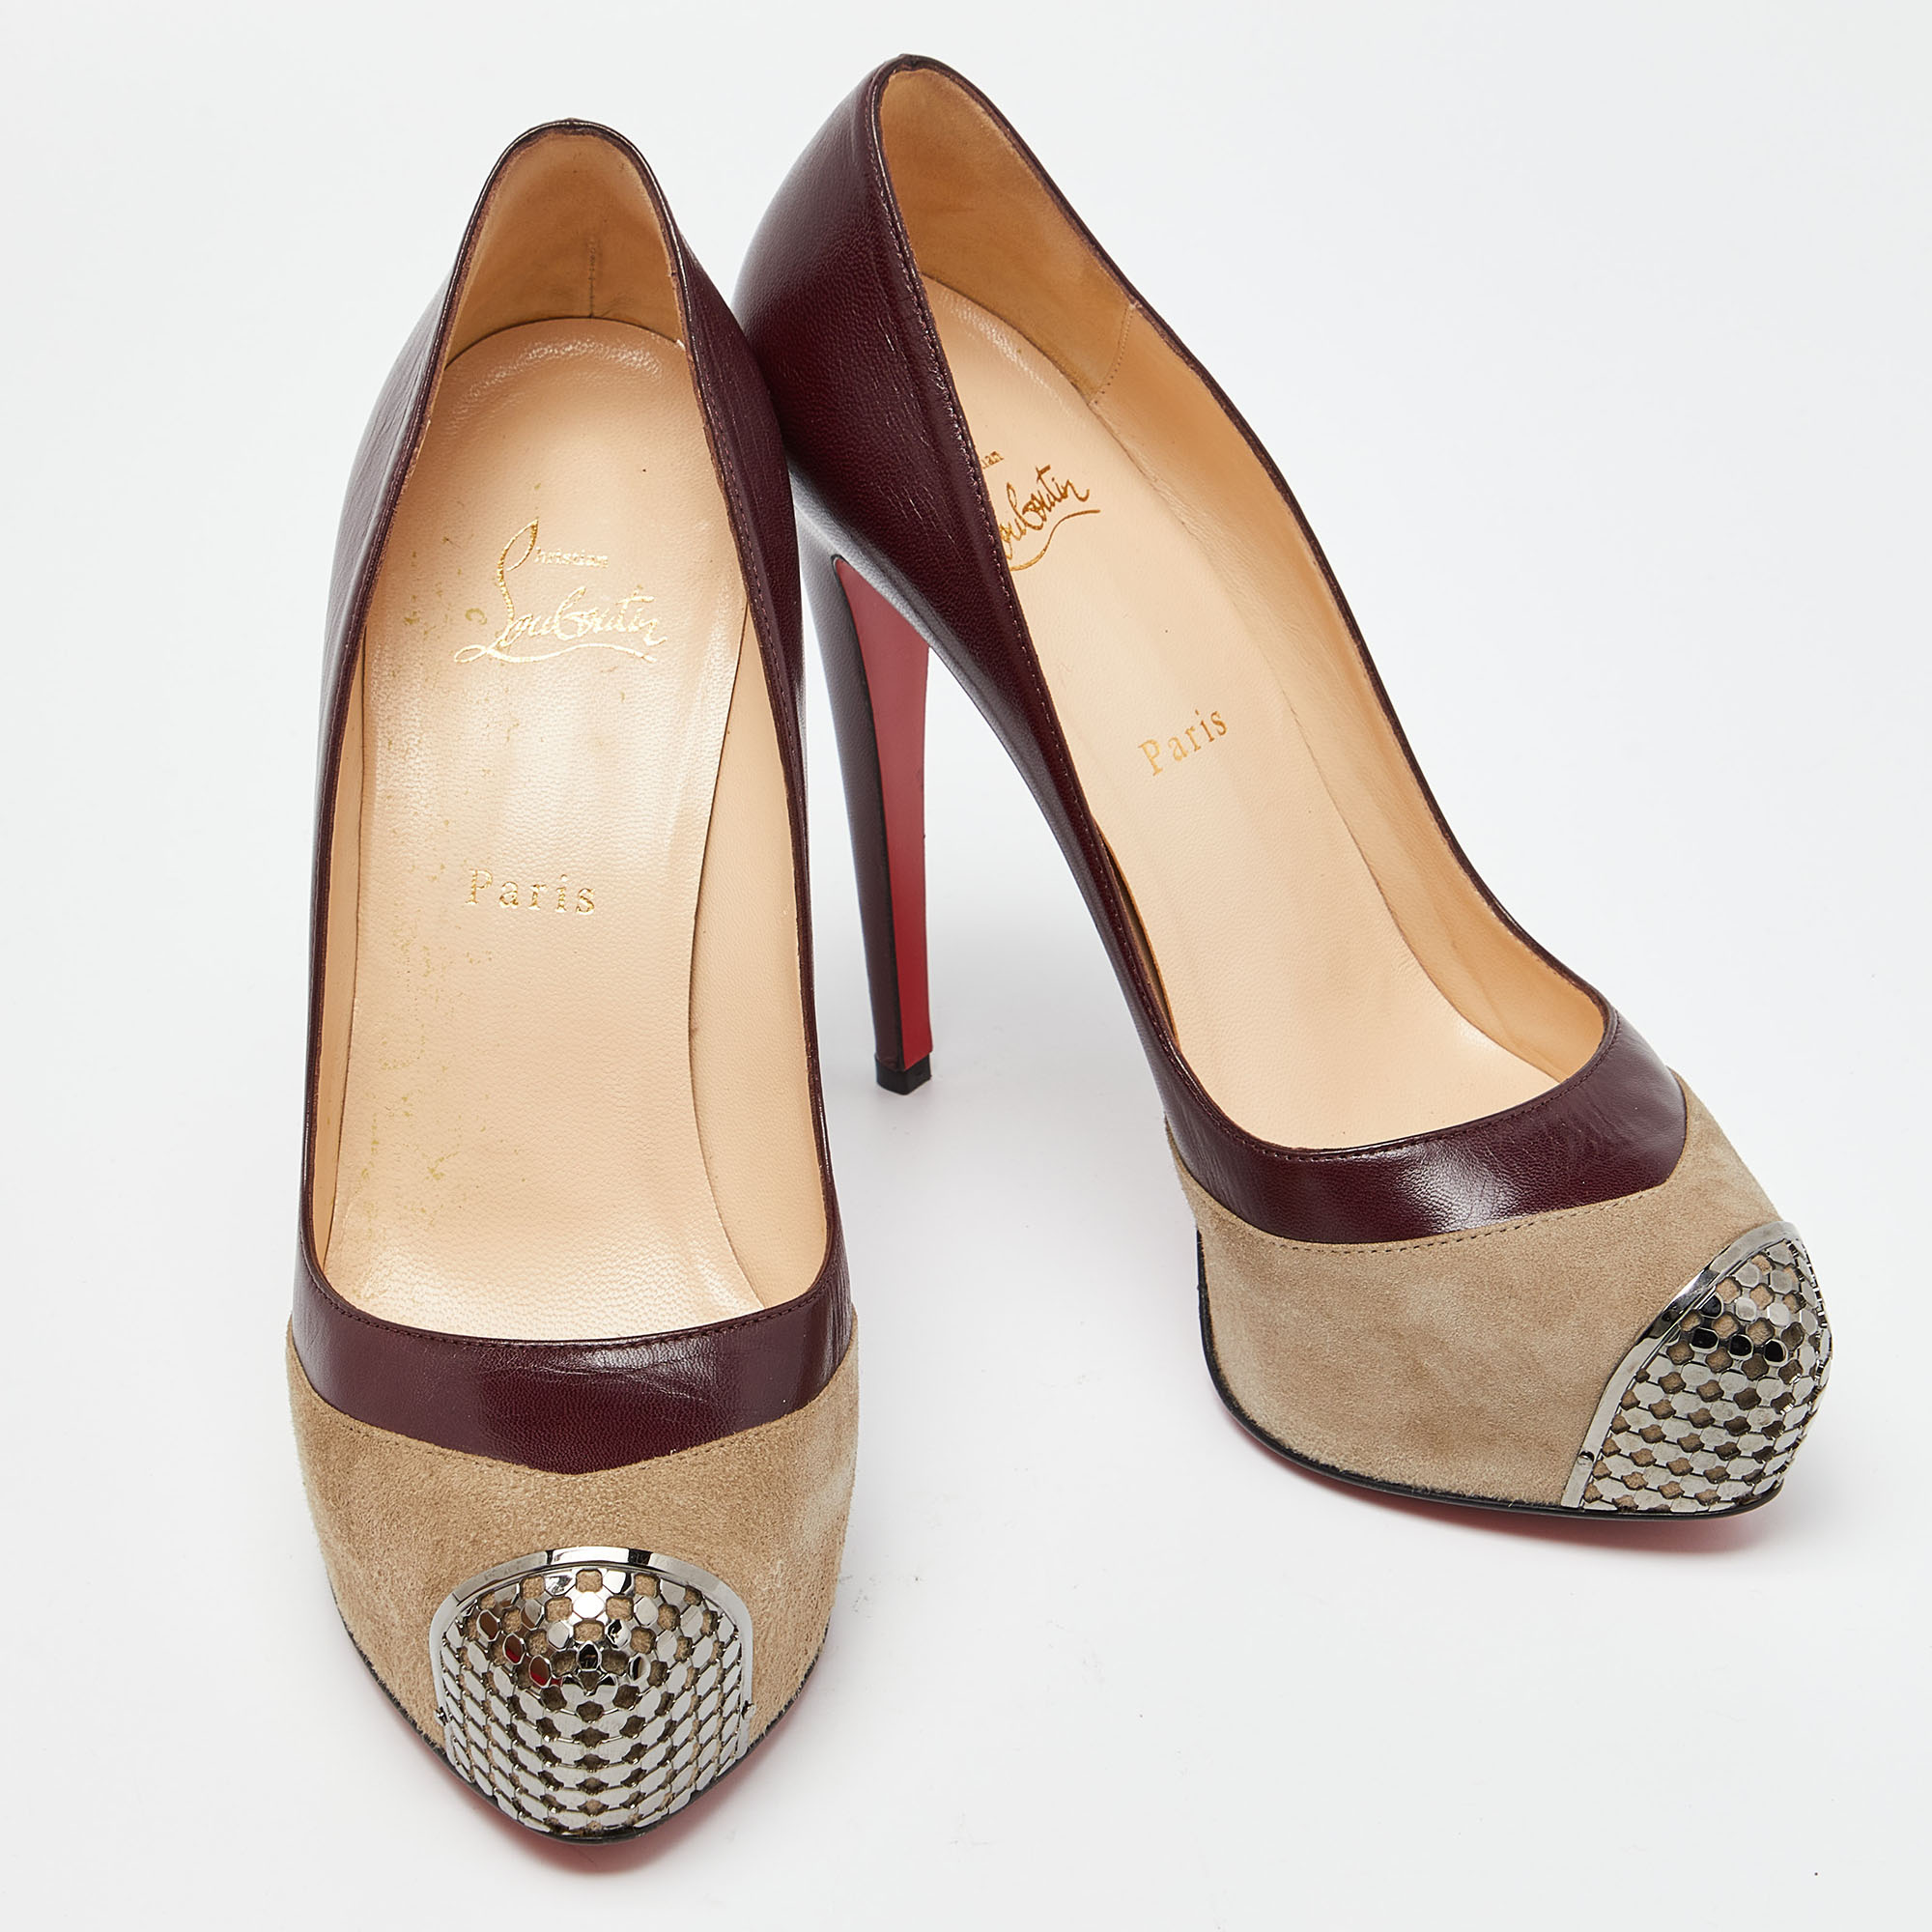 Christian Louboutin Burgundy/Grey Leather And Suede Maggie Platform Pumps Size 40.5